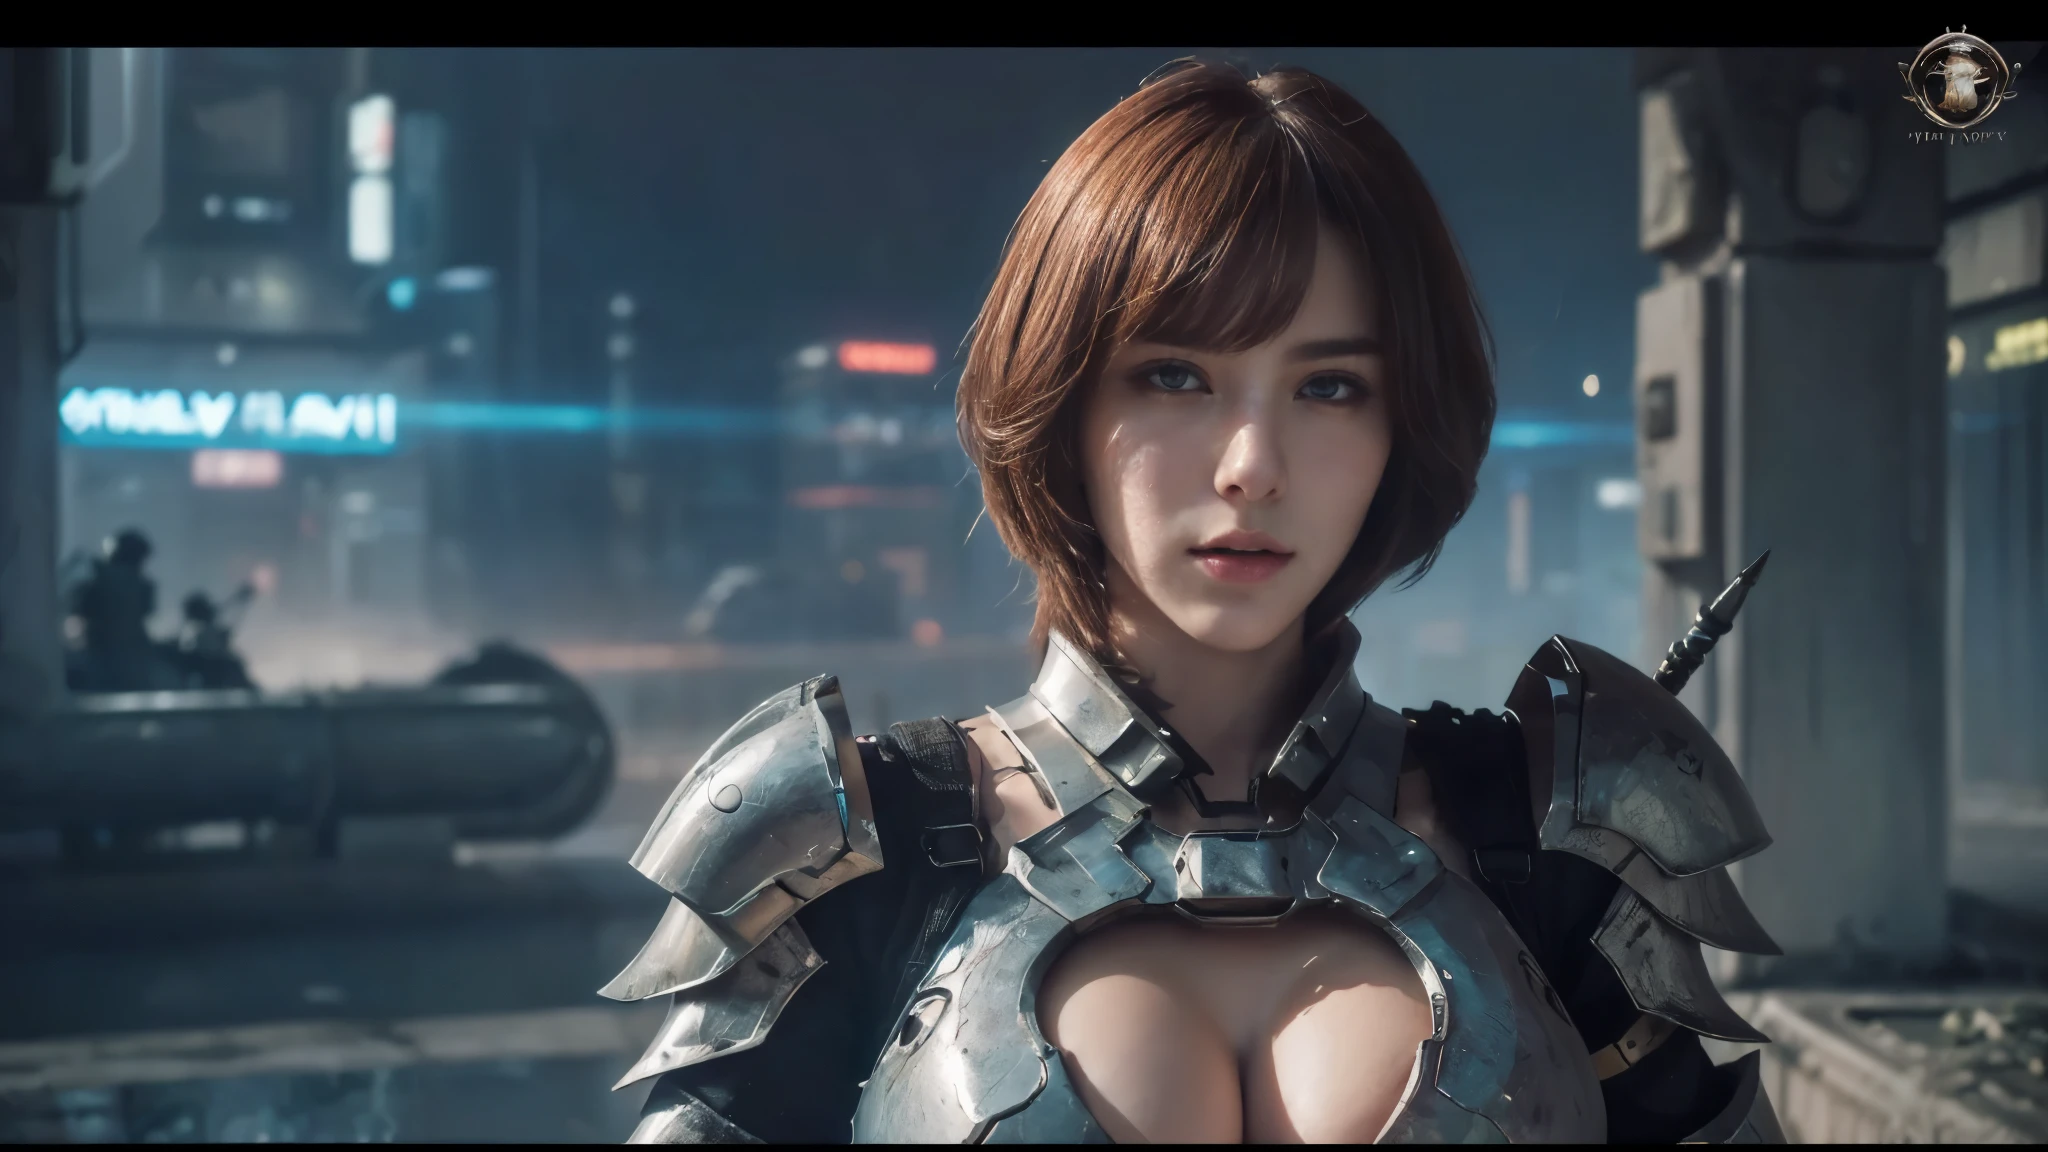 masterpiece,best quality,high resolution,8k,(Portrait Photos:1.5),(R Original Photo),real picture,Digital Photography,(A fusion of cyberpunk and fantasy),(Female Soldiers),20 year old girl,Feel free to hairstyle，By Bangs,(Large Breasts, Accessories,shut your mouth,Elegant and charming,Serious and arrogant,Calm and handsome,(Combination of cyberpunk and fantasy style clothing,Hollow carving design,Large Breasts，Combined Armor，night，Dynamic poses，dramatic，Realistic style,oc render reflection texture，sentry，futuristic city，Medium distance photography